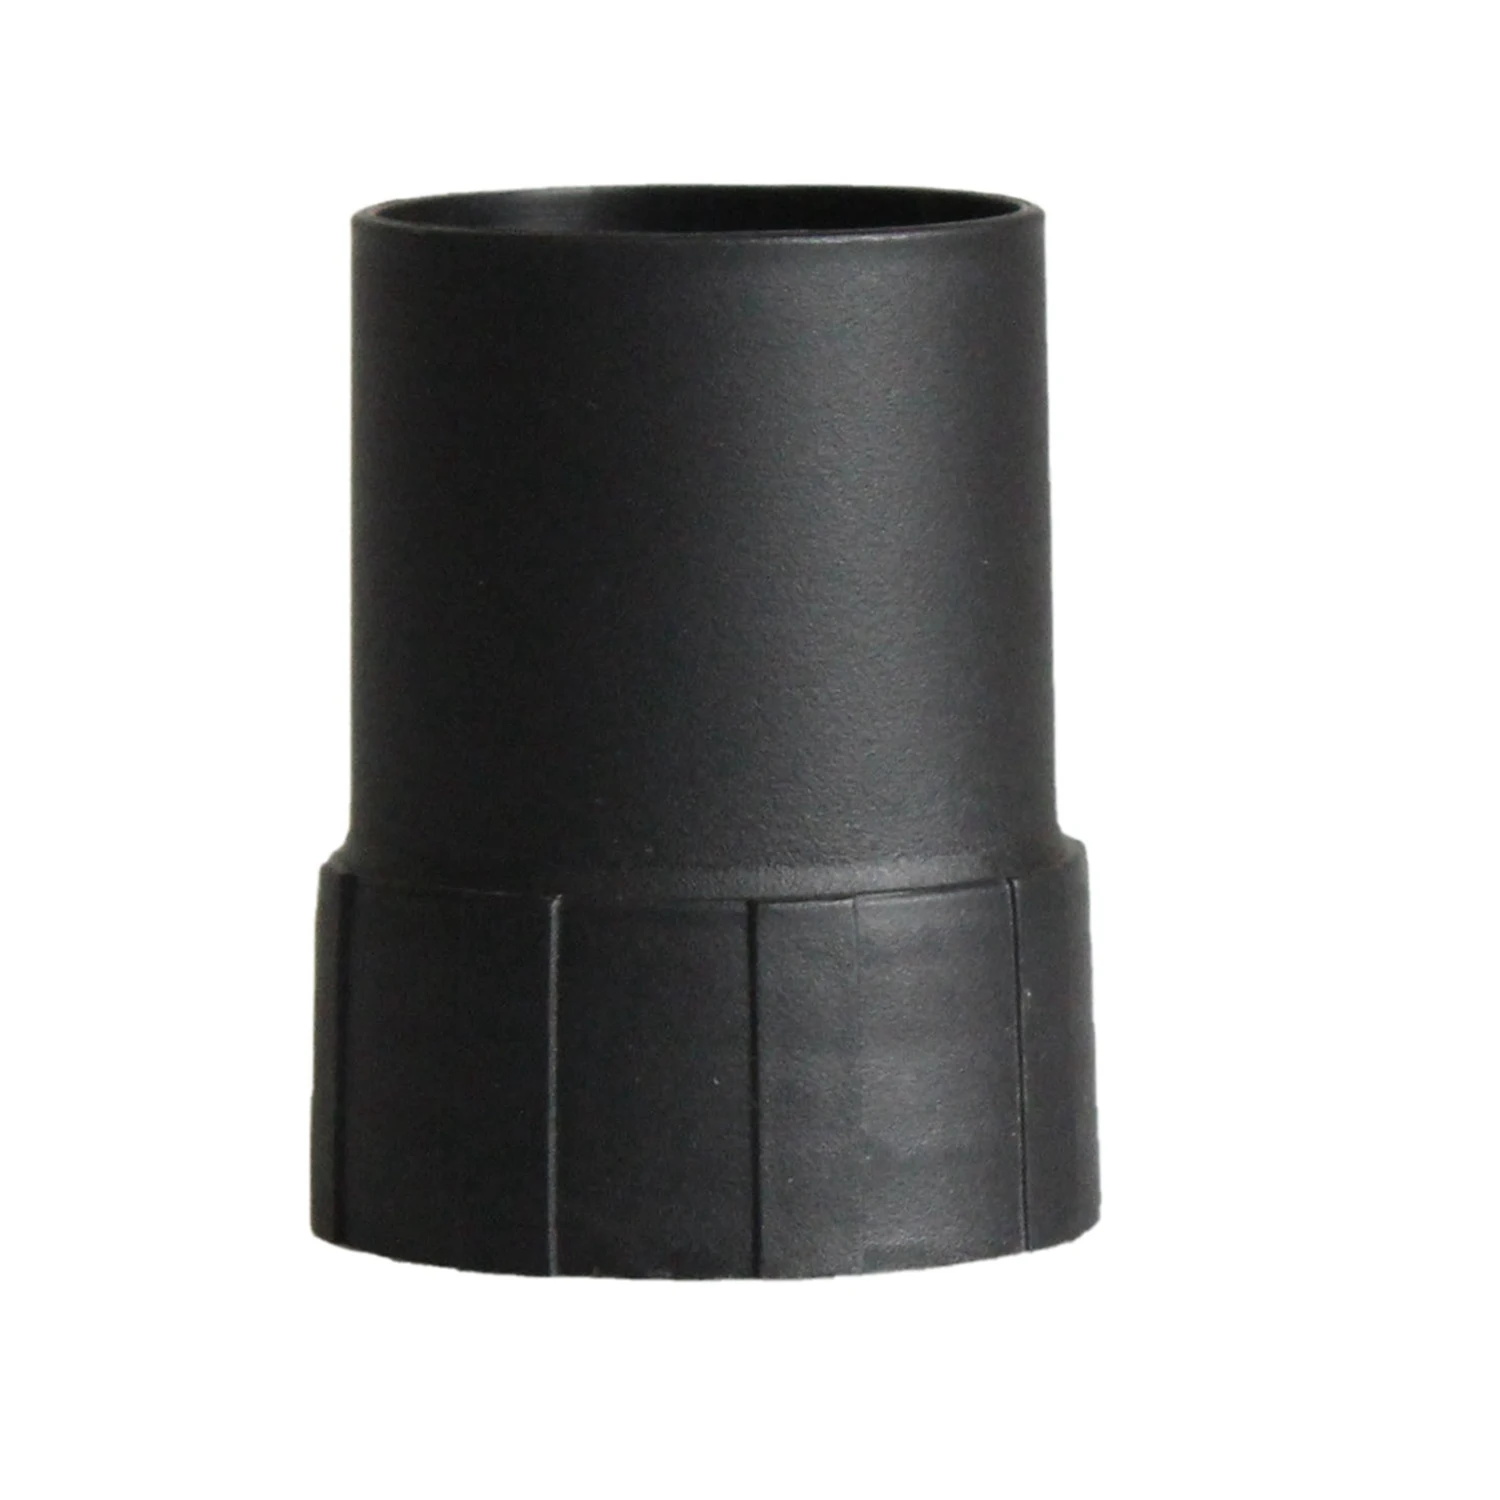 

Industrial Vacuum Cleaner Host Connector 53/58mm Connect Hose Adapter and Host for Thread Hose 50mm/58mm Vacuum Cleaner Parts